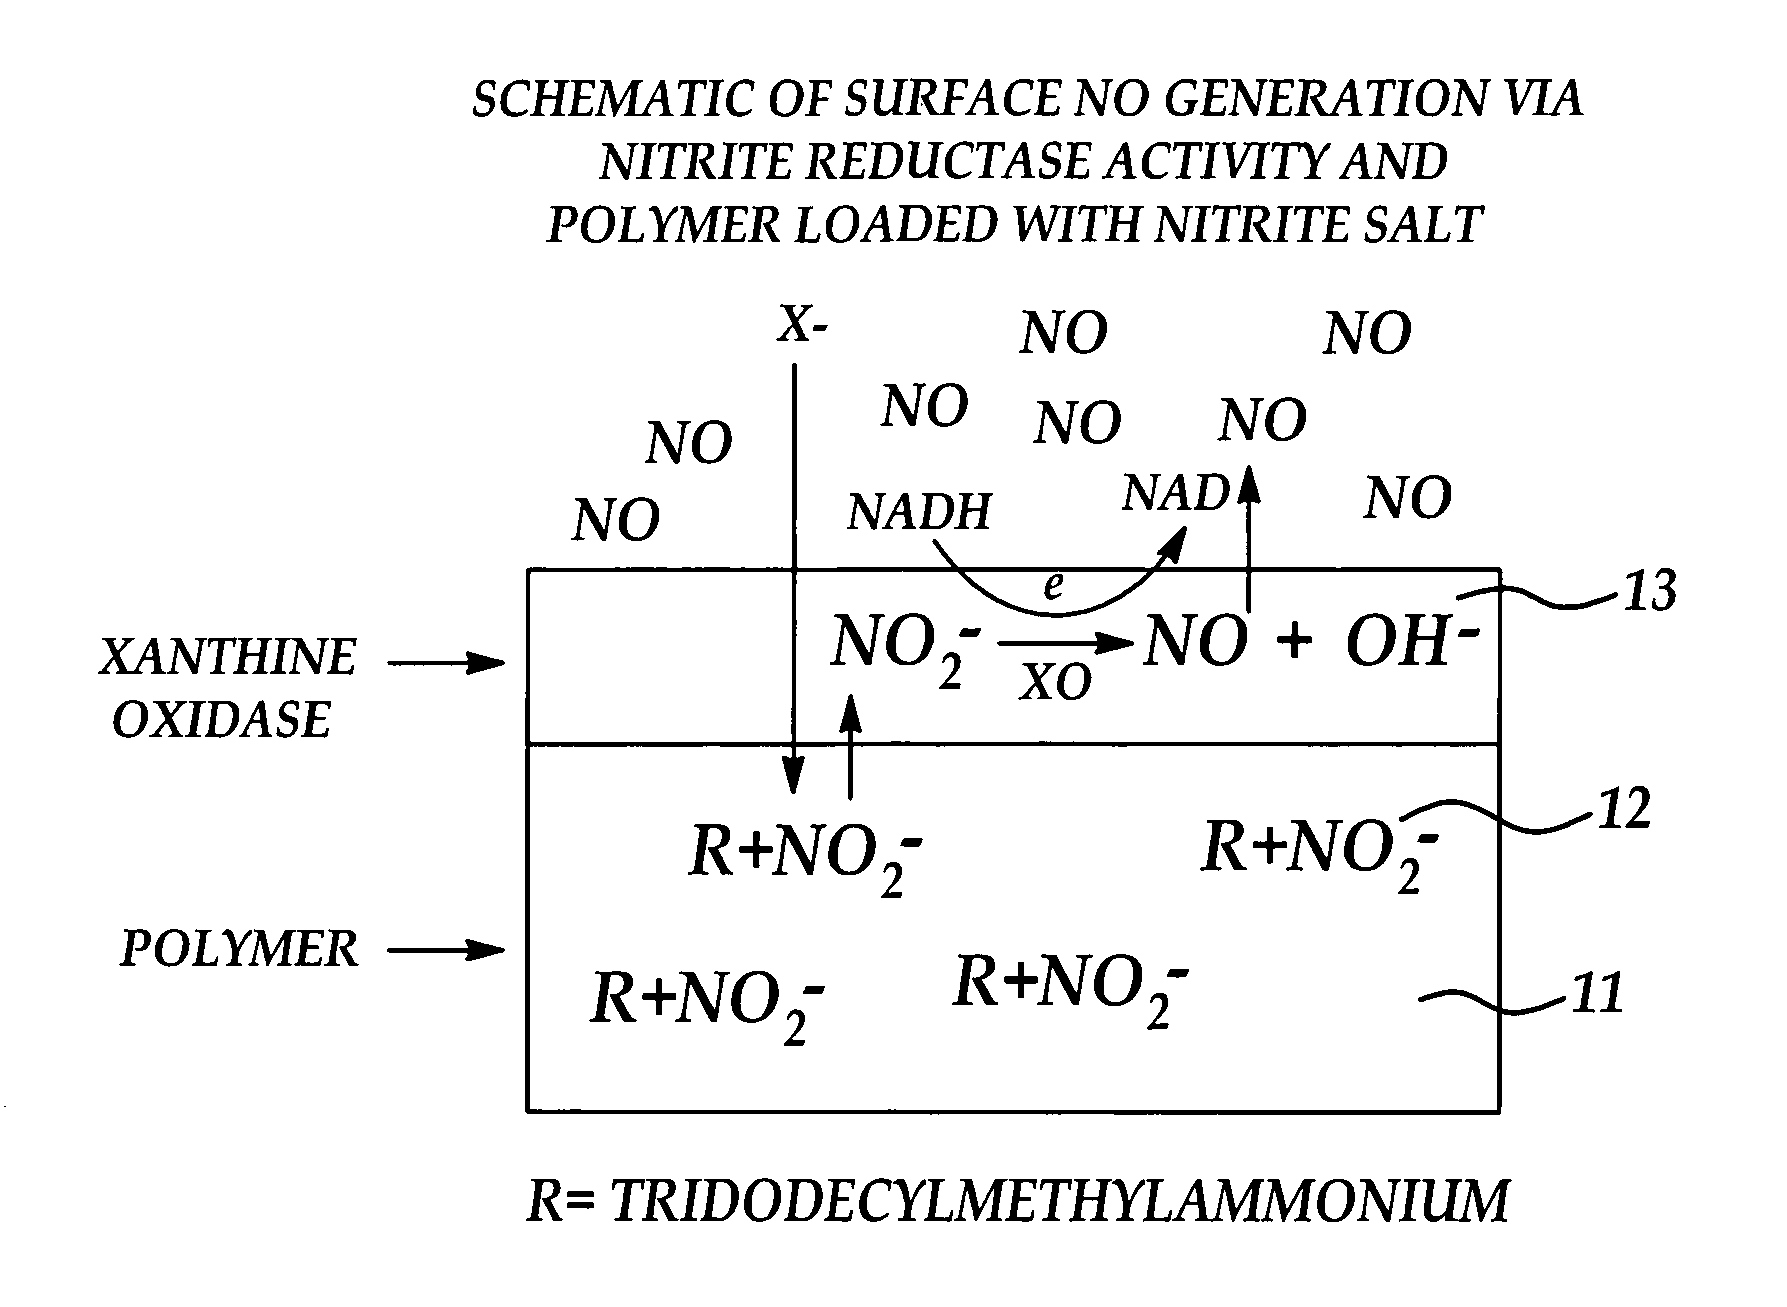 Material containing metal ion ligand complex producing nitric oxide in contact with blood